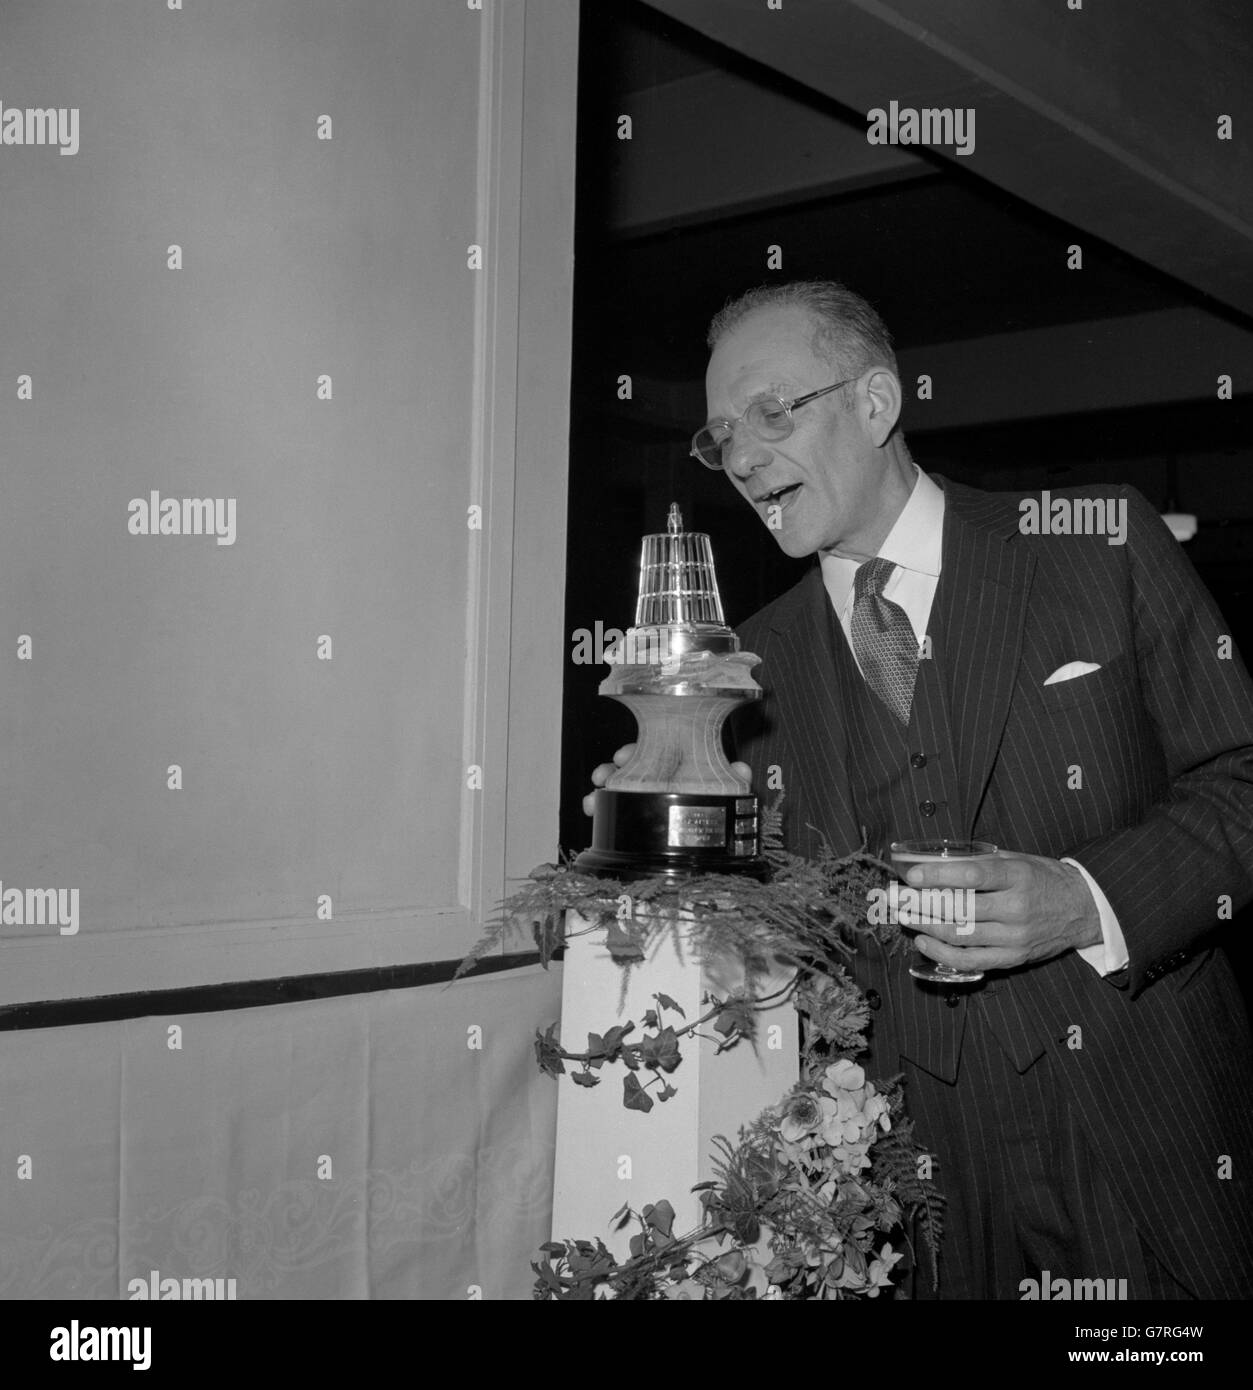 Glass in hand, 58 year old Francis Chichester exclaims with delight as he takes a close look at the Yachtsman of the Year award shortly after it had been presented to him at the Boat Show at Earl's Court, London. Francis Chichester, from Barnstaple, will be remembered for his success with a 39 foot yacht which he sailed alone to win the transatlantic race from England to America in July last year. Stock Photo